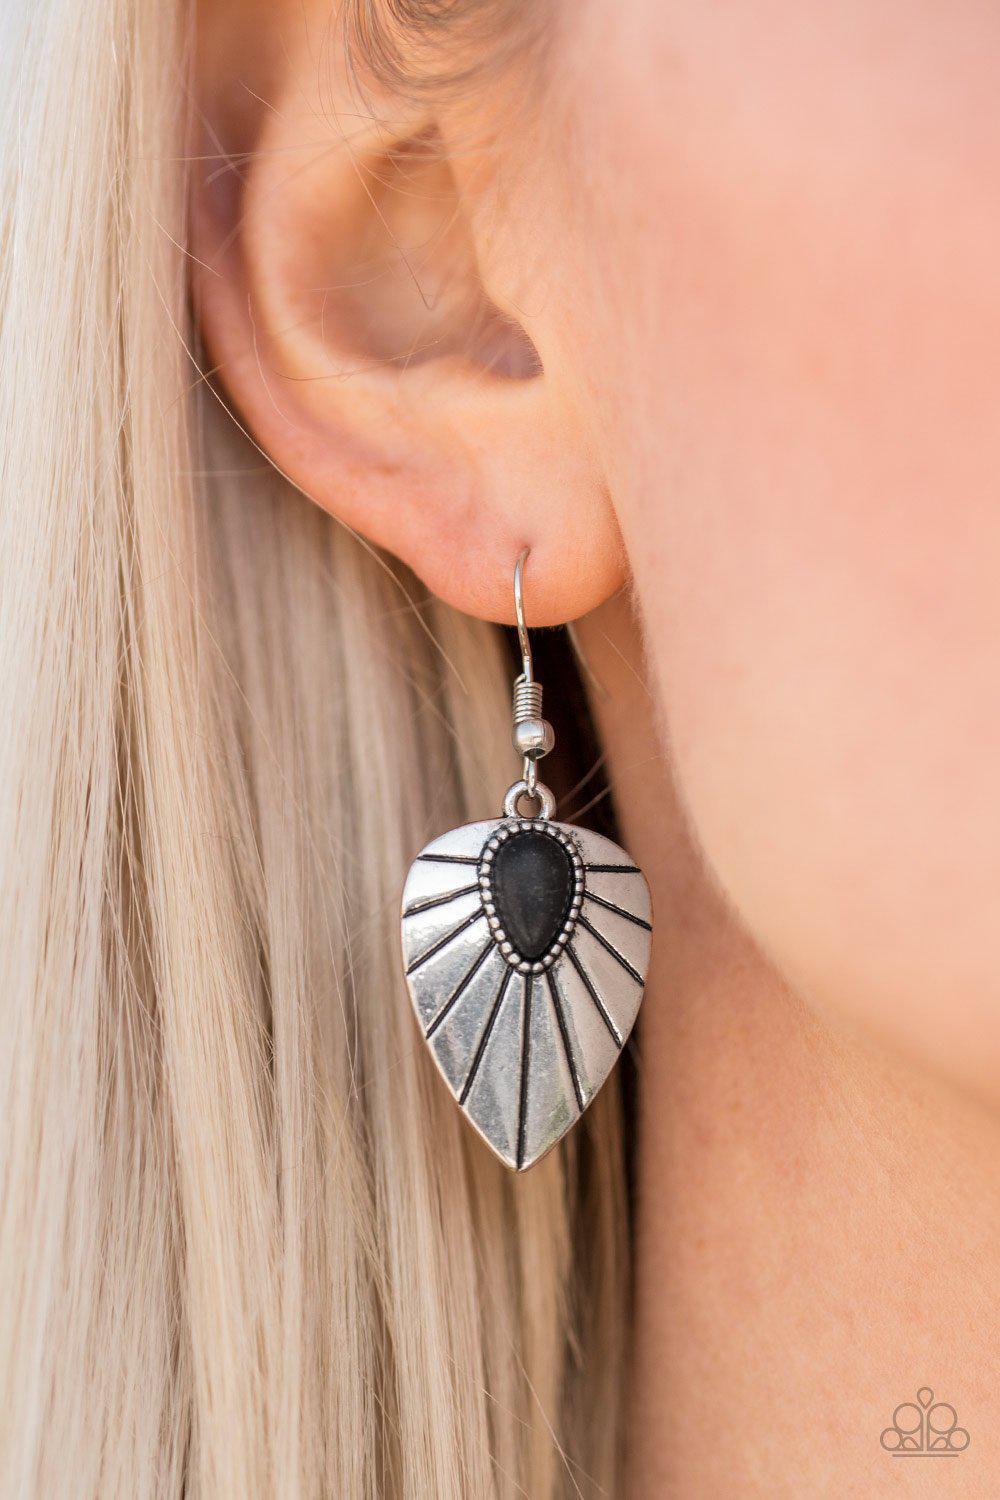 Wild Palms Black Stone and Silver Palm Leaf Earrings - Paparazzi Accessories-CarasShop.com - $5 Jewelry by Cara Jewels